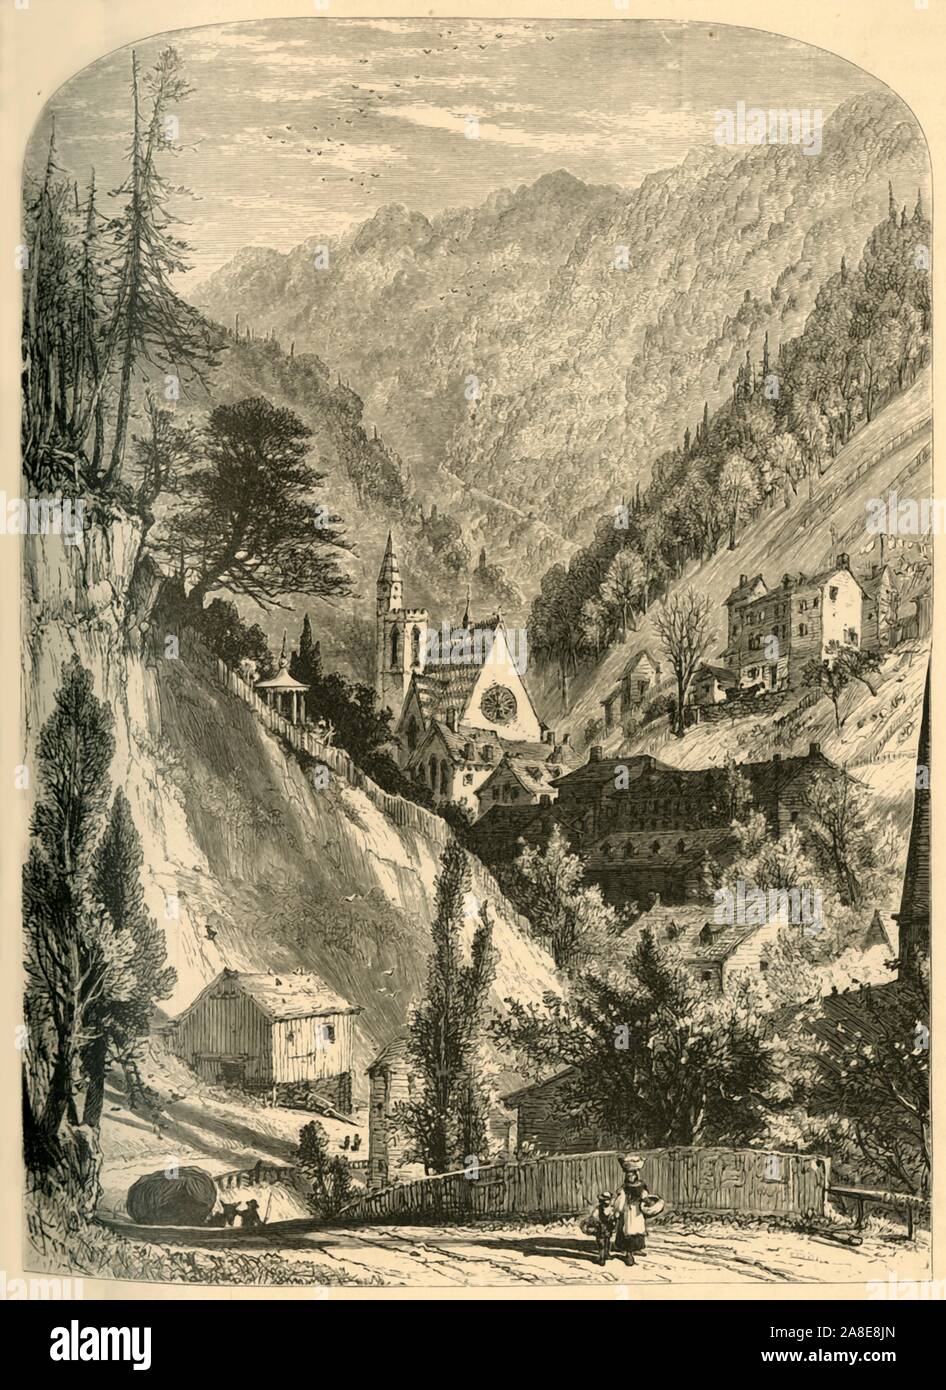 'Machu Chunk, from Foot of Mount Pisgah', 1872. View of the town of Mauch Chunk, the lower terminus of the Mauch Chunk and Summit railroad, Pennsylvania, USA. From &quot;Picturesque America; or, The Land We Live In, A Delineation by Pen and Pencil of the Mountains, Rivers, Lakes...with Illustrations on Steel and Wood by Eminent American Artists&quot; Vol. I, edited by William Cullen Bryant. [D. Appleton and Company, New York, 1872] Stock Photo